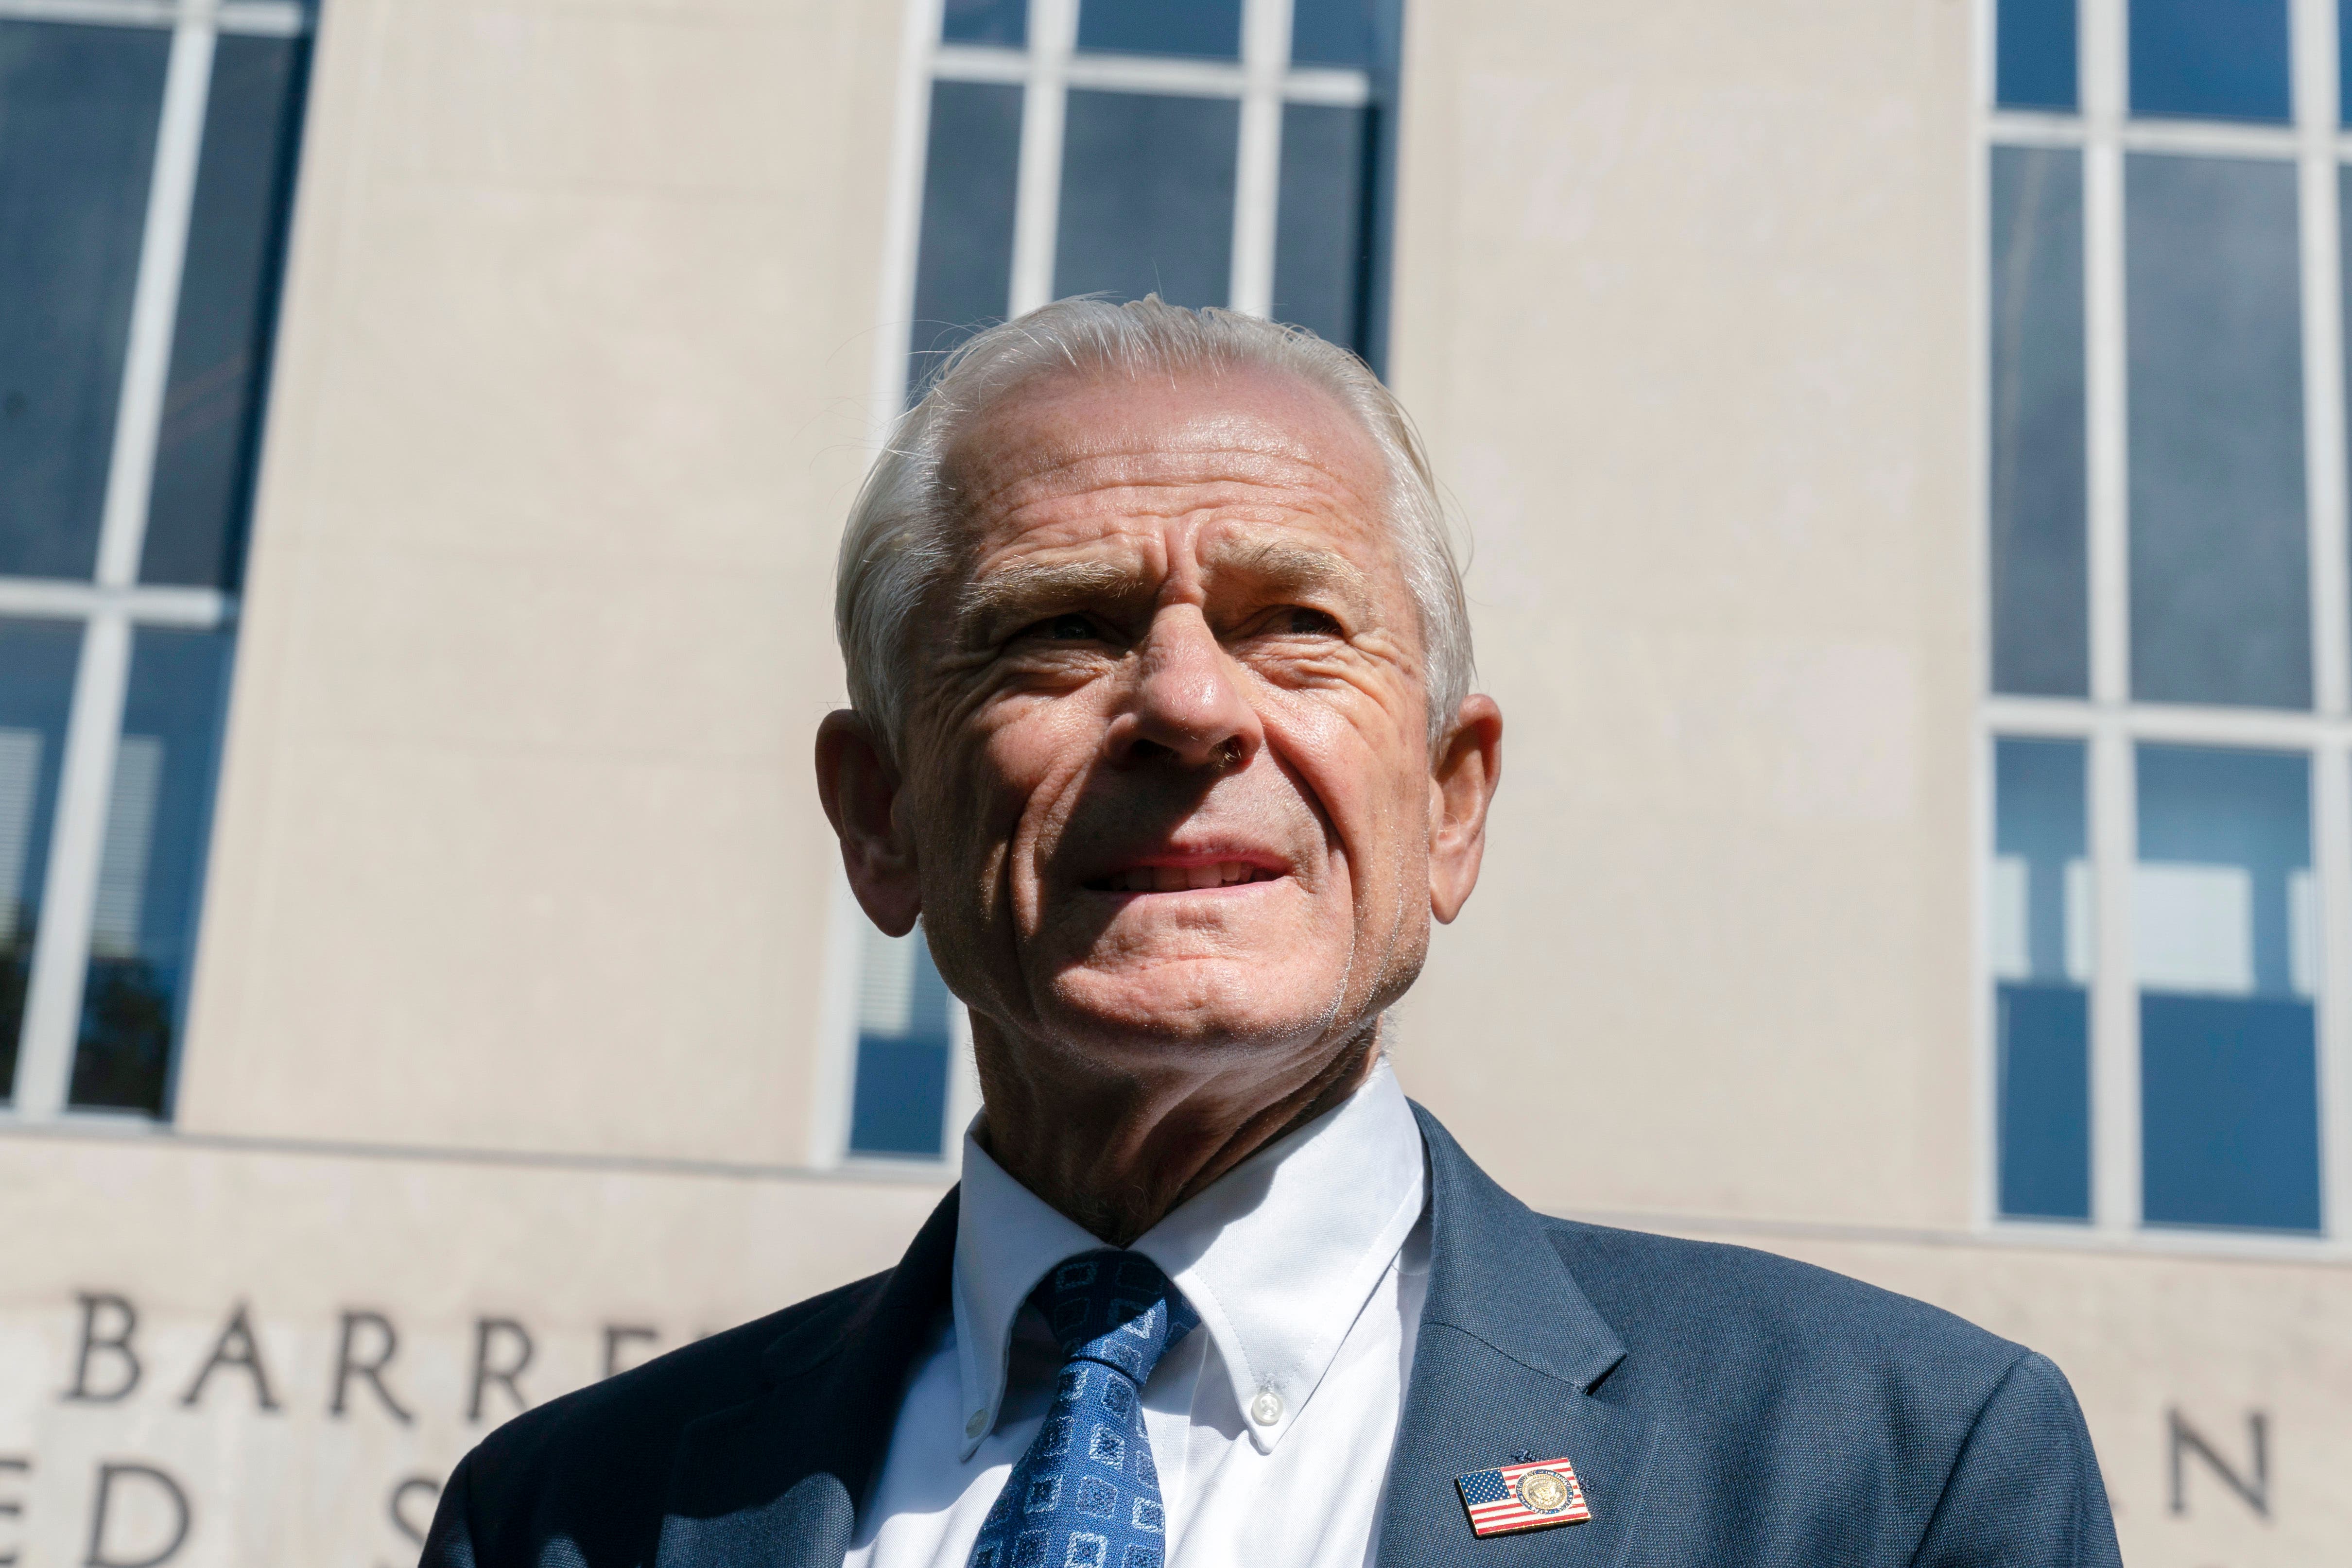 Trump White House official Peter Navarro to go on trial in September in Jan 6 contempt case